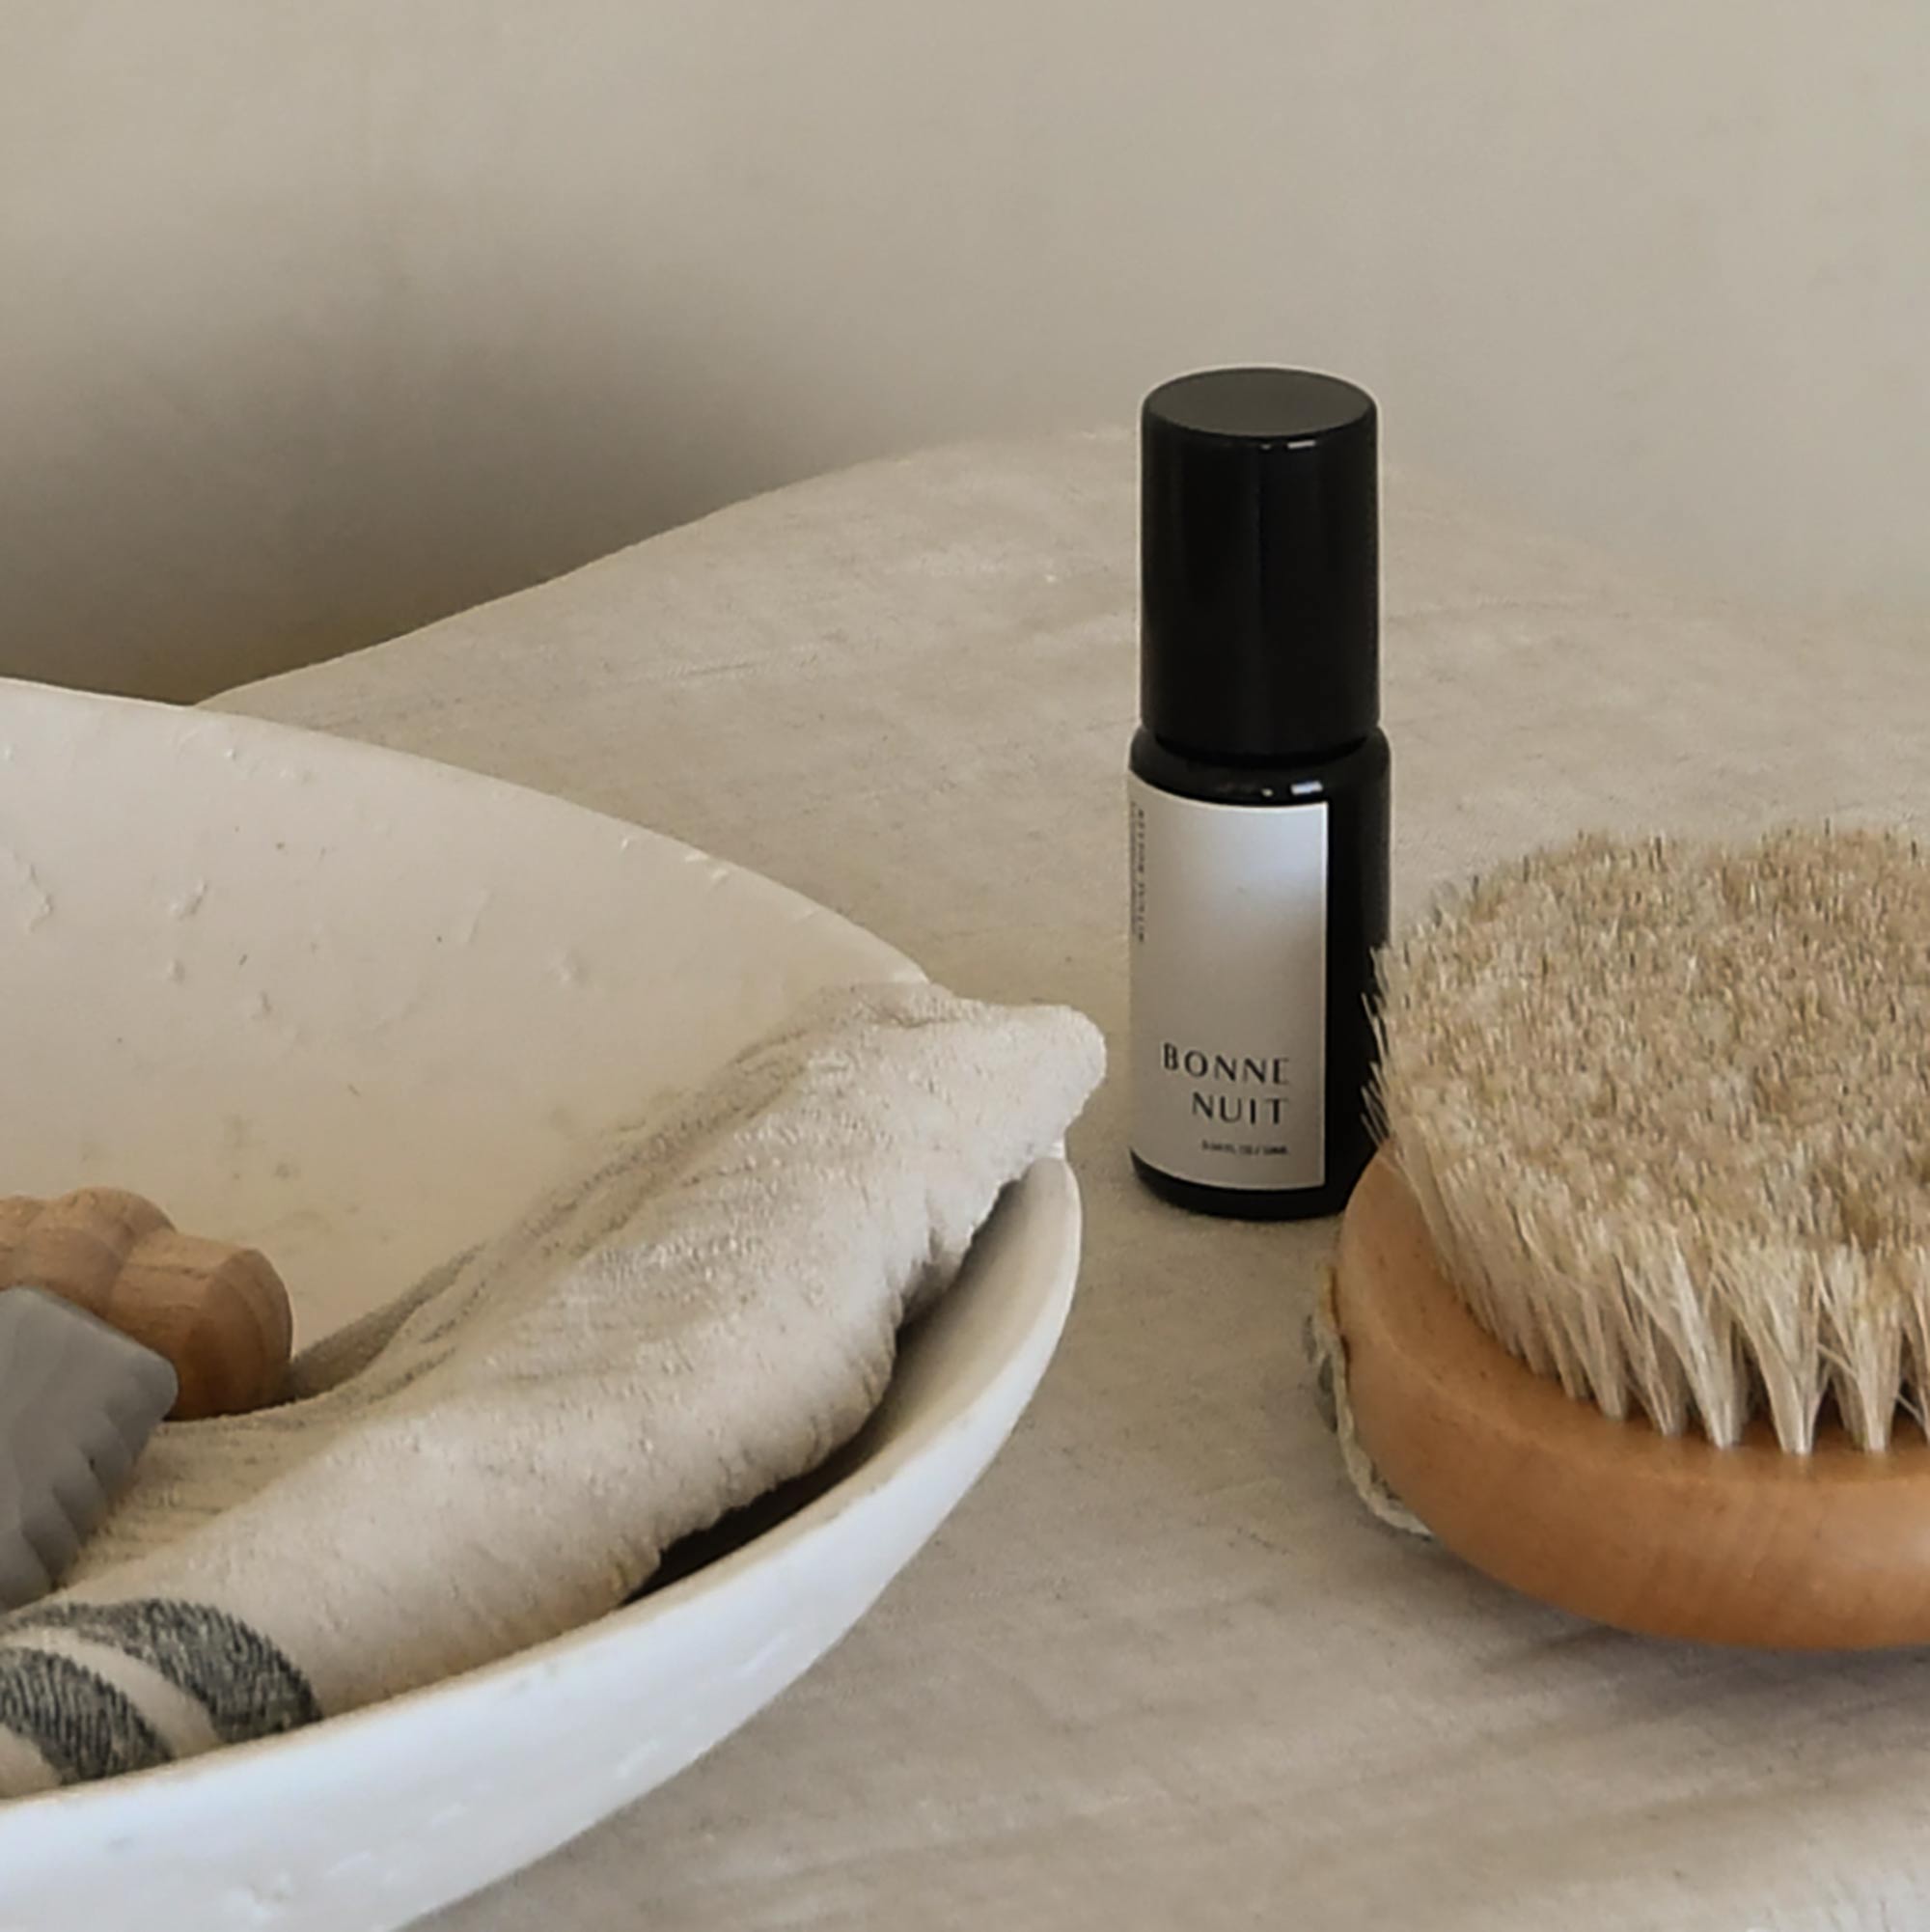 aromatherapy roller on the table with bath essentials